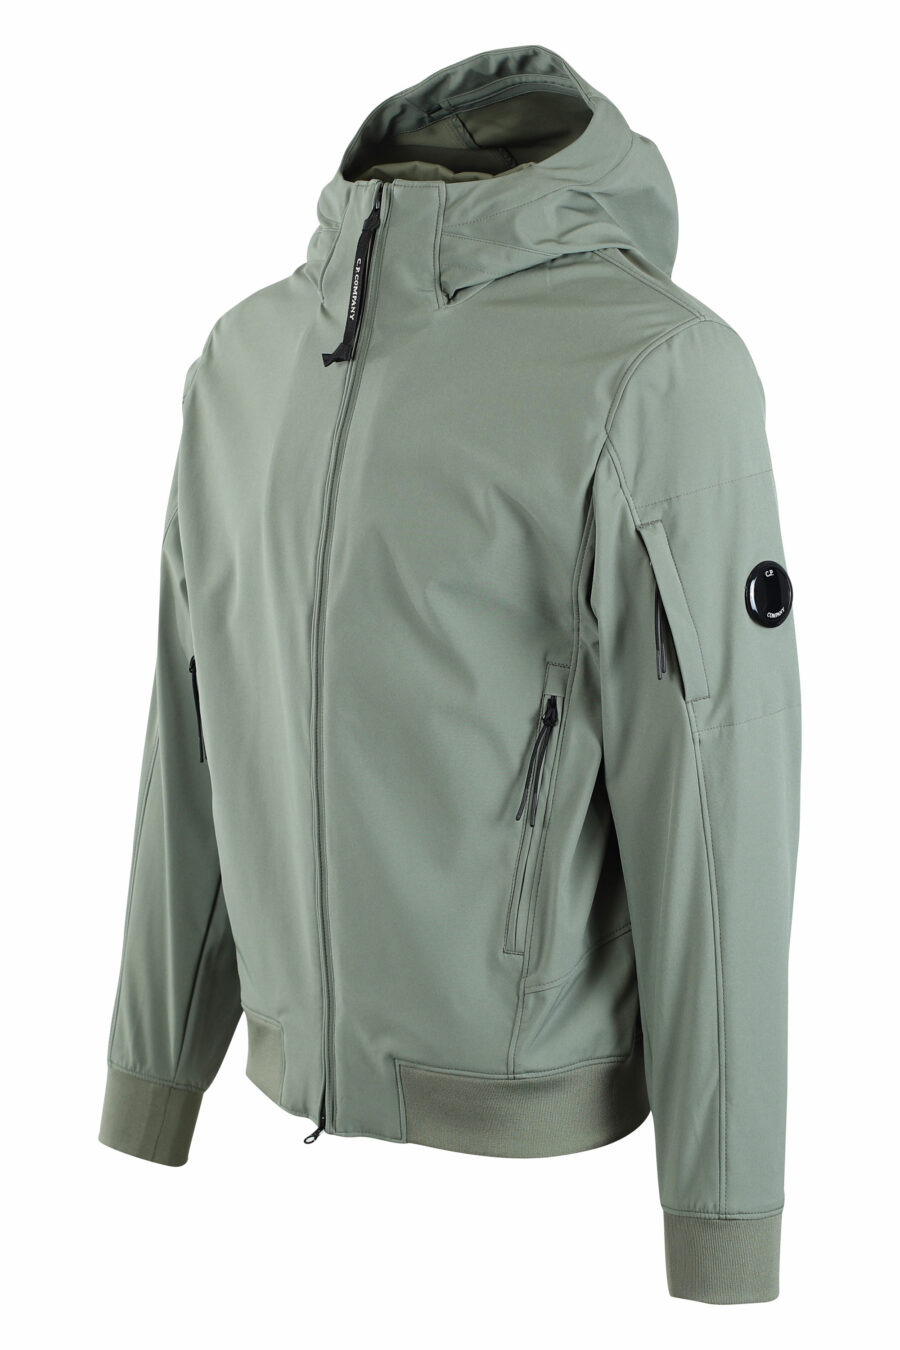 Military green jacket with hood and side pocket with circular mini-logo - IMG 2685